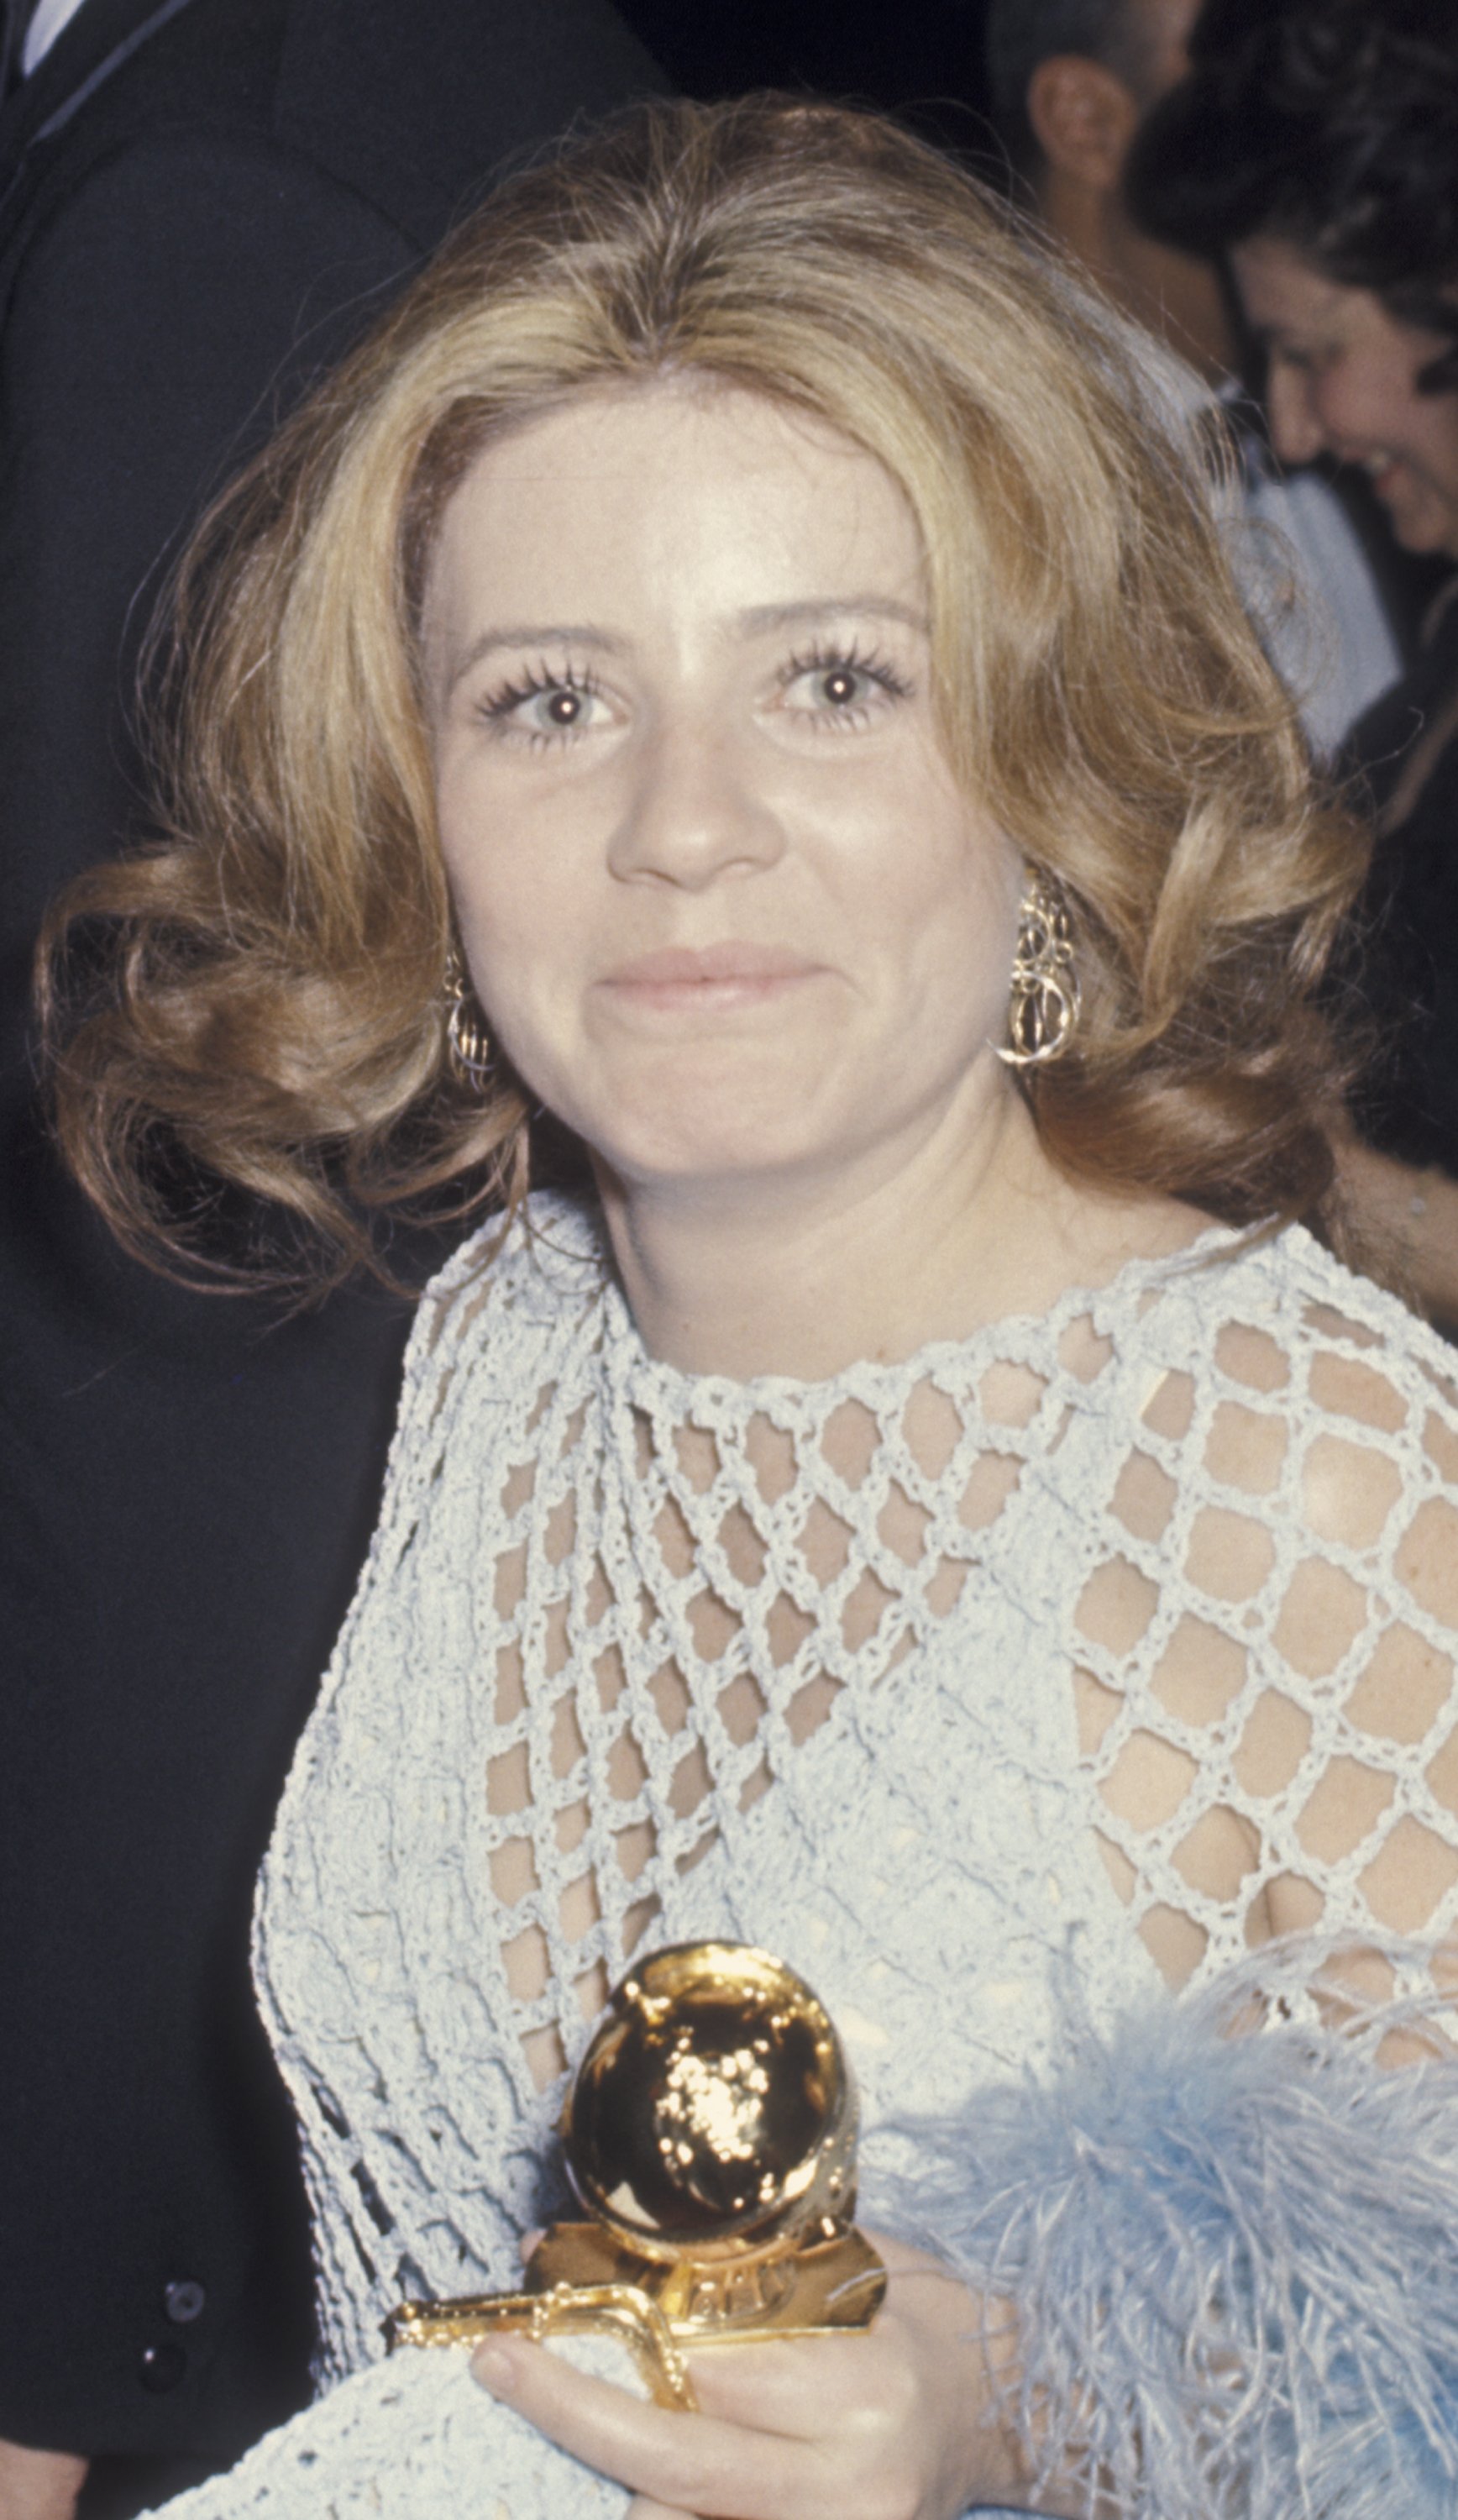 Patty Duke at the 27th Annual Golden Globe Awards on February 2, 1970, in Los Angeles, California. | Source: Getty Images